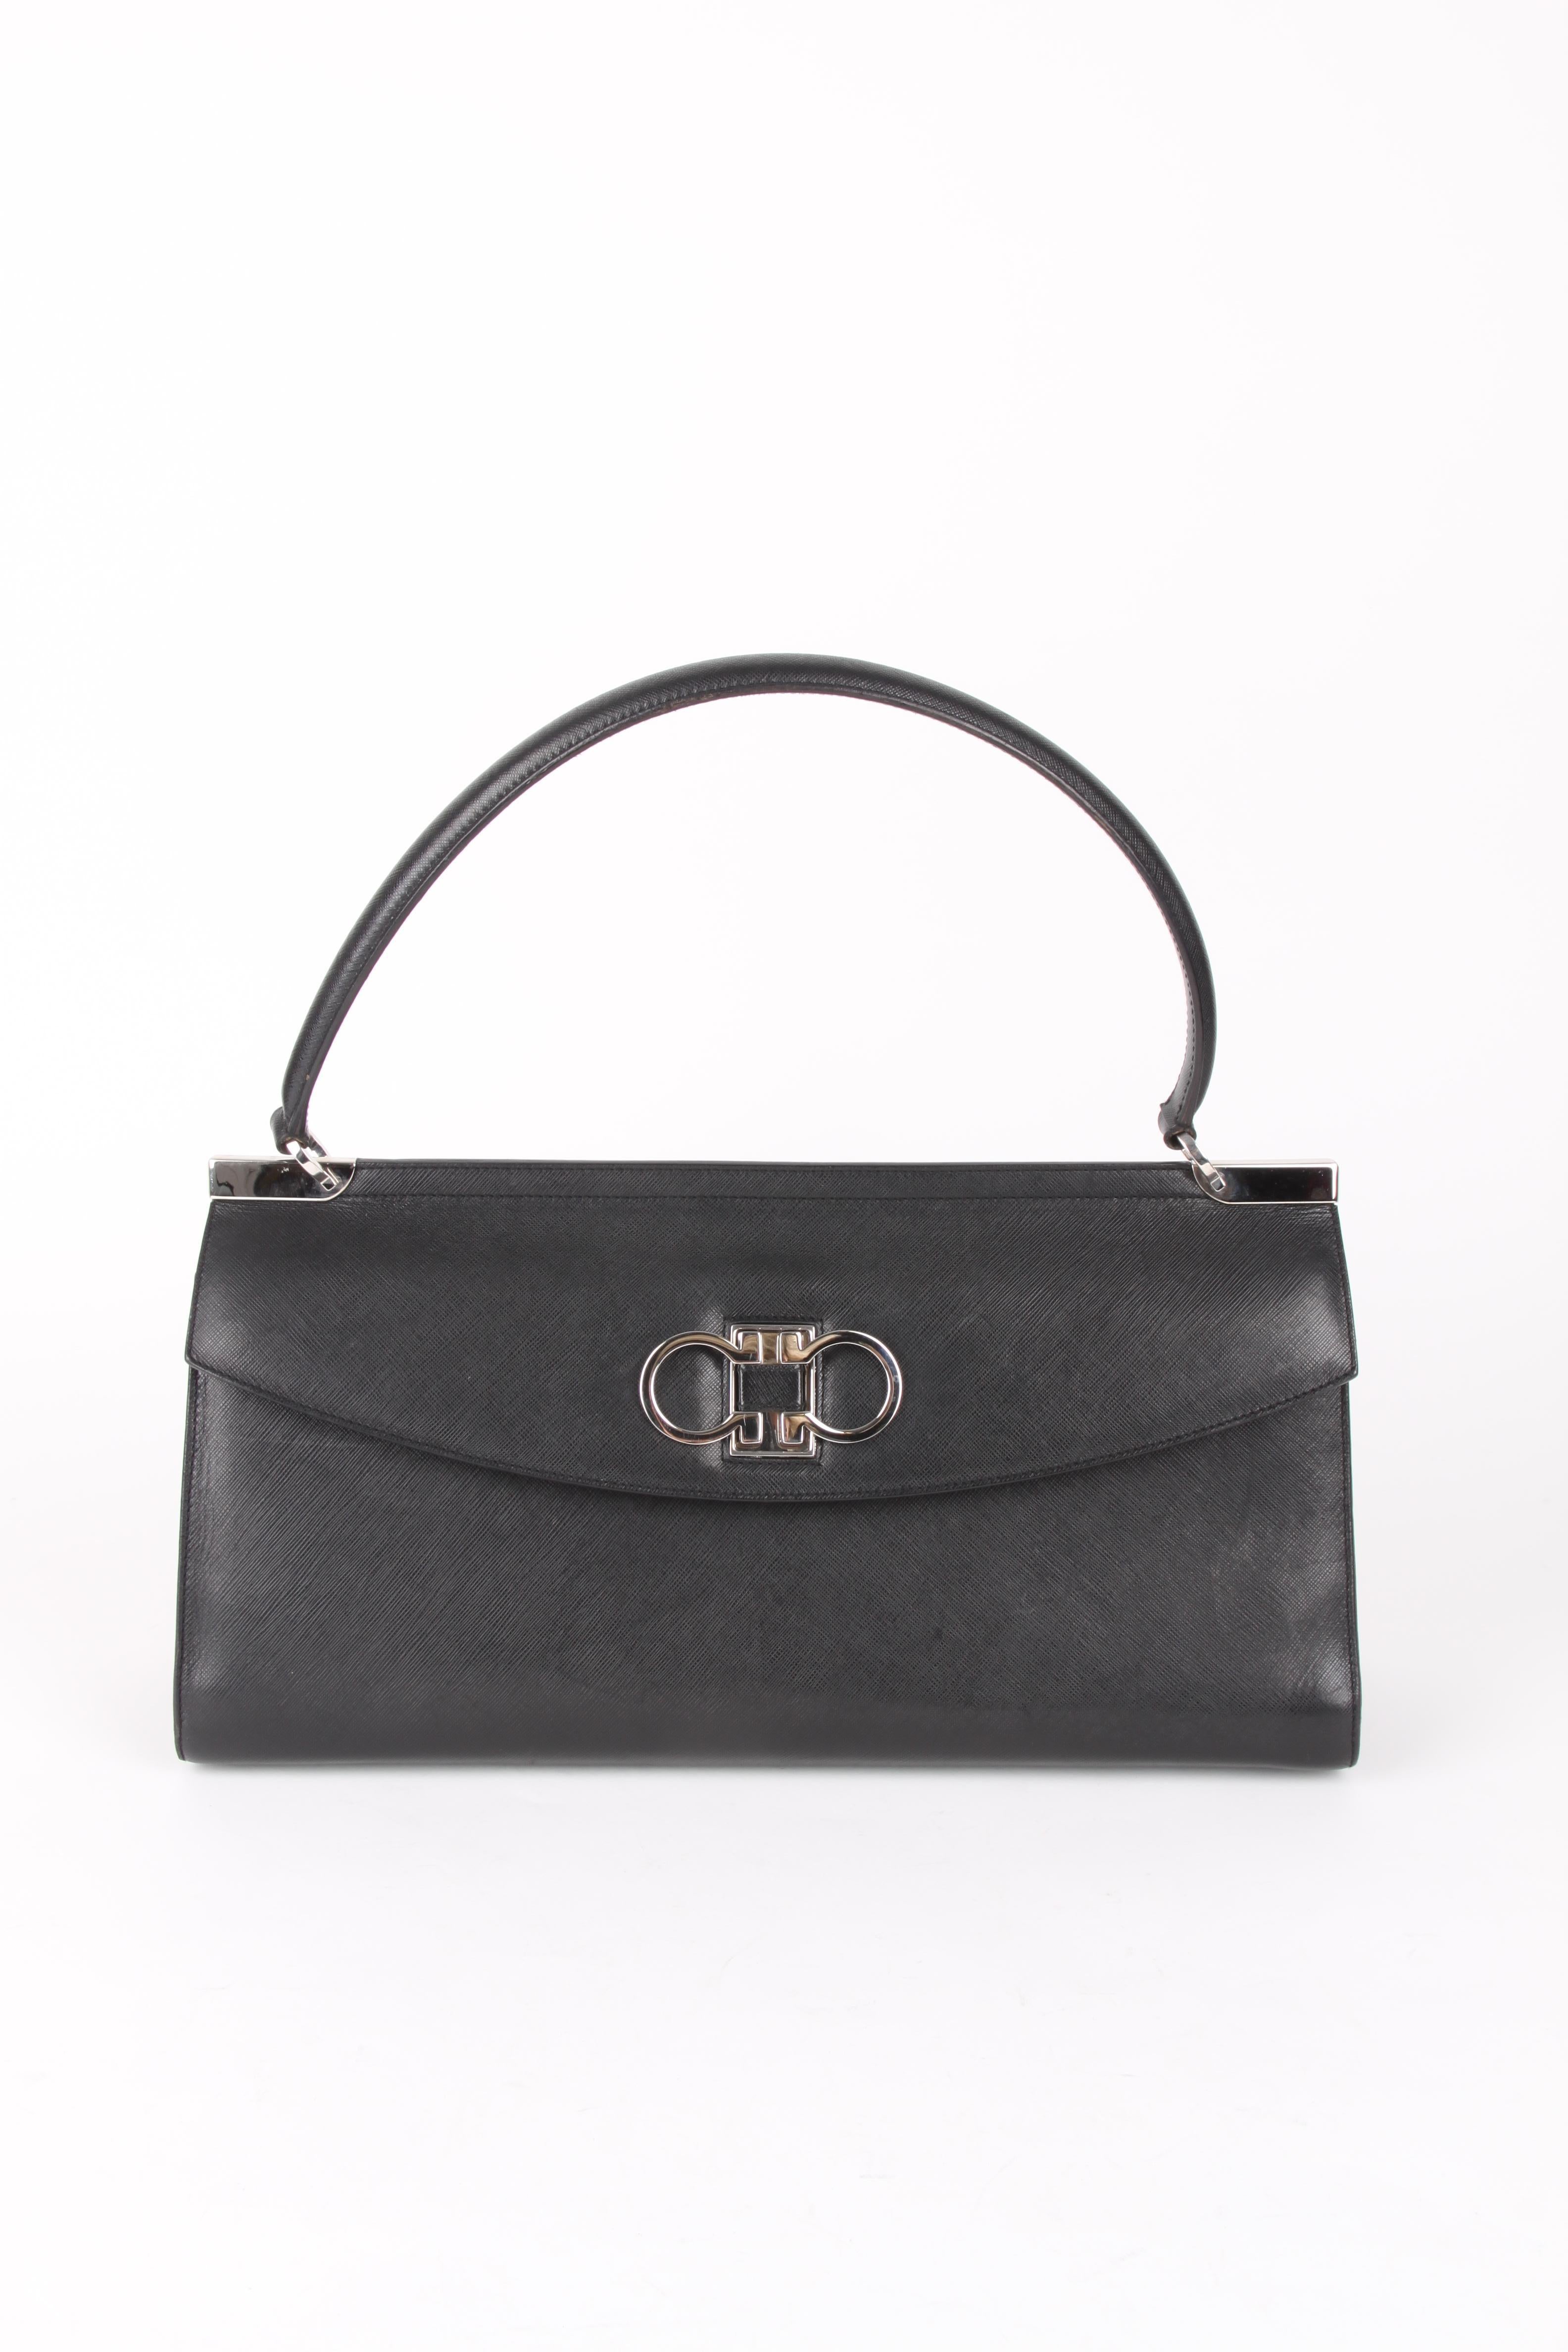 Salvatore Ferragamo Logo Plaque Leather Clutch Handbag.

The definition of Italian luxury, Salvatore Ferragamo prides itself on a seamless blend of high-quality materials, impeccable craftsmanship and a timeless design vision. This black leather